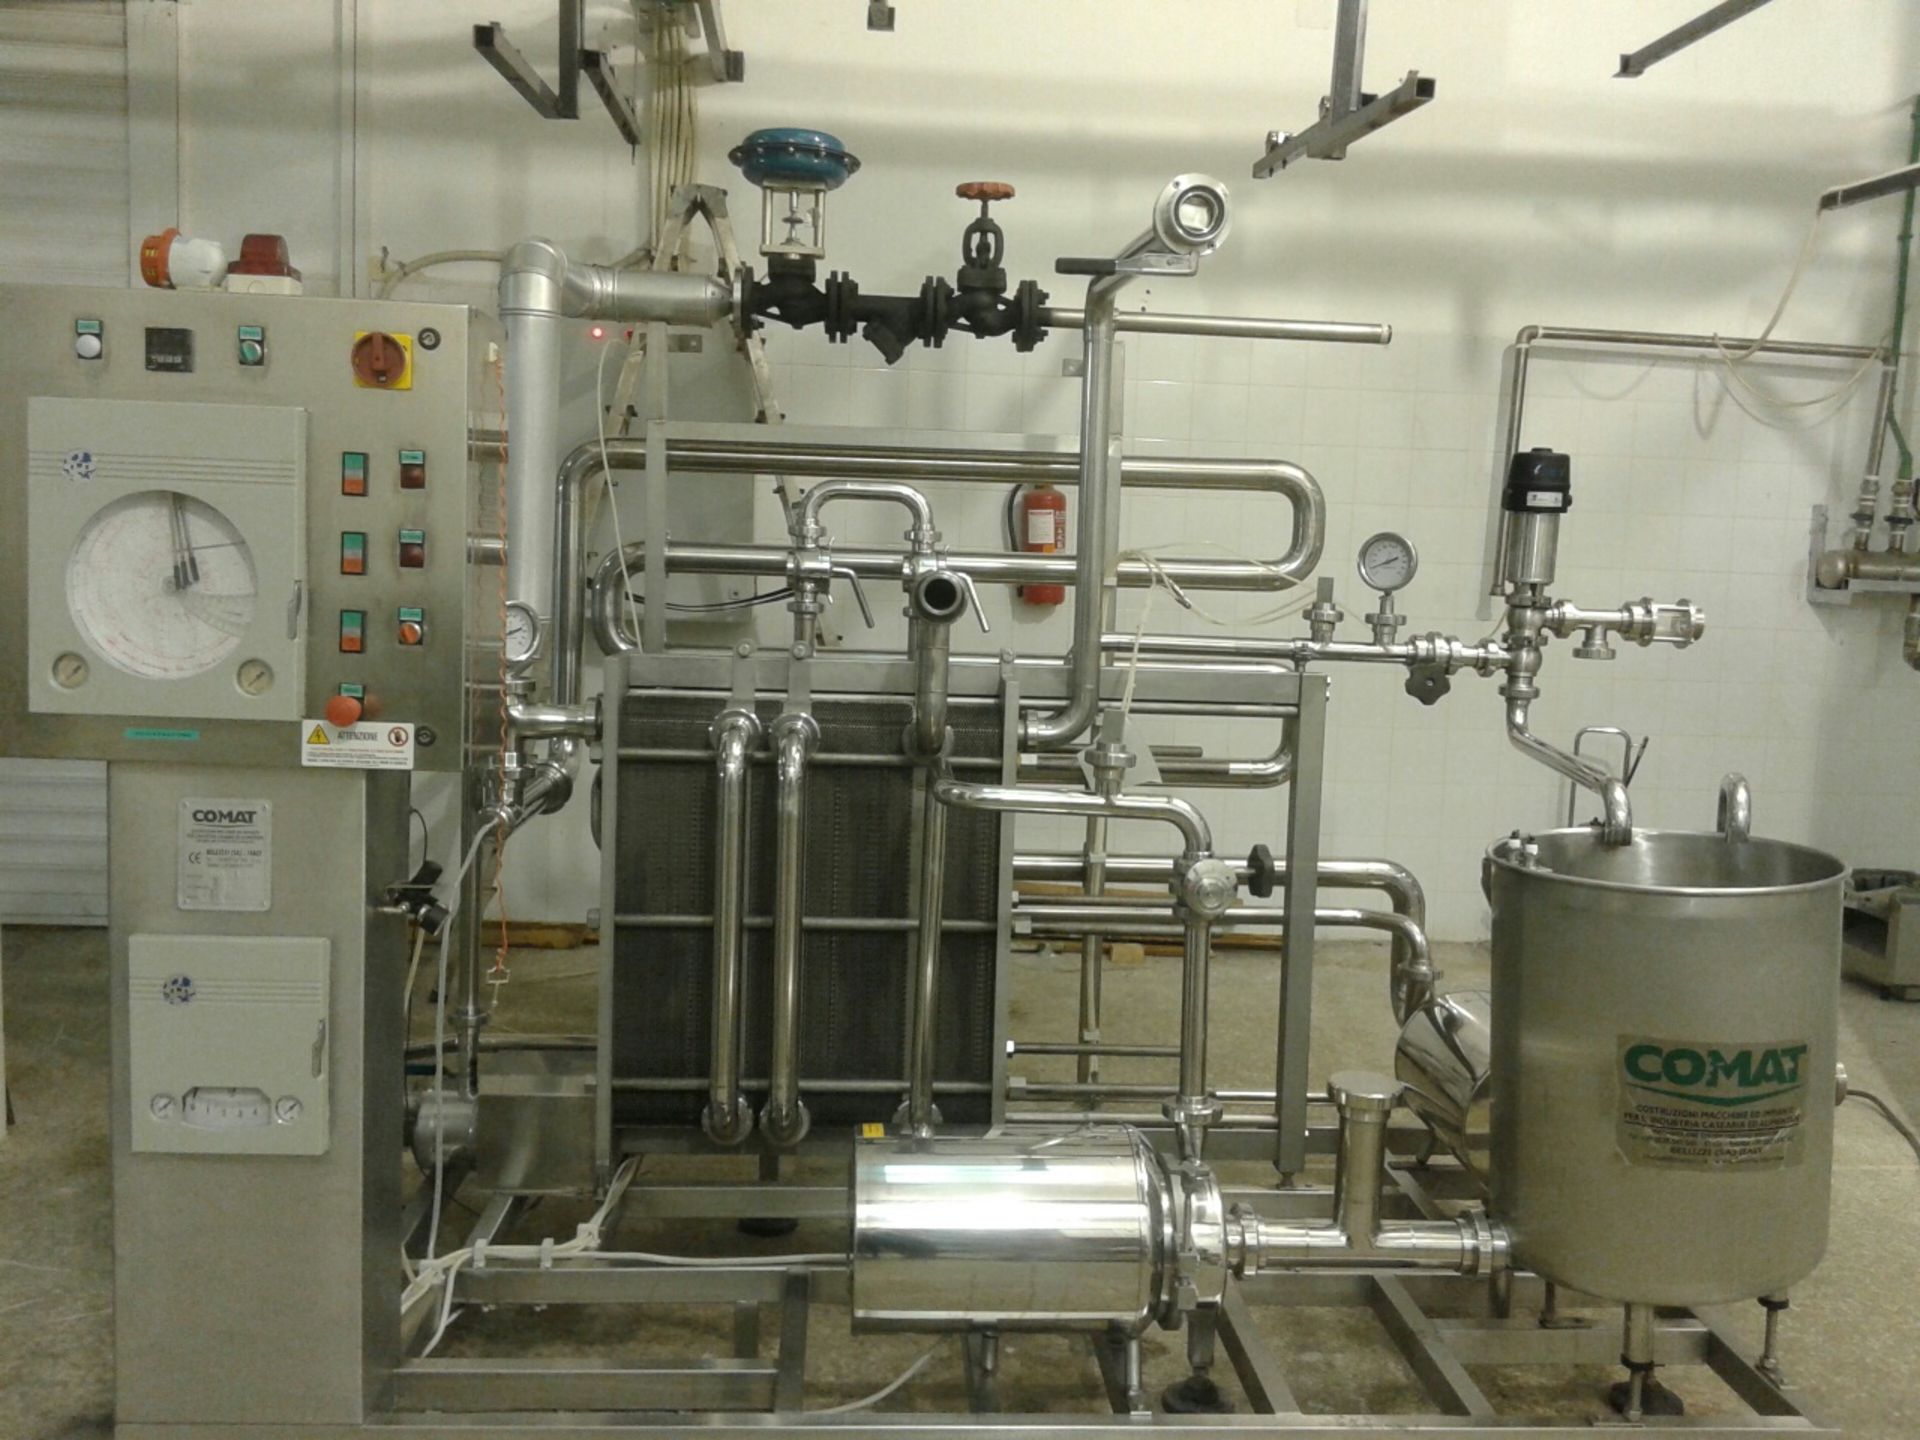 Comat Skid-Mounted Pasteurizer 6000 Ltr Per Hour, Balance Tank, Two Product Pumps, - Image 2 of 5